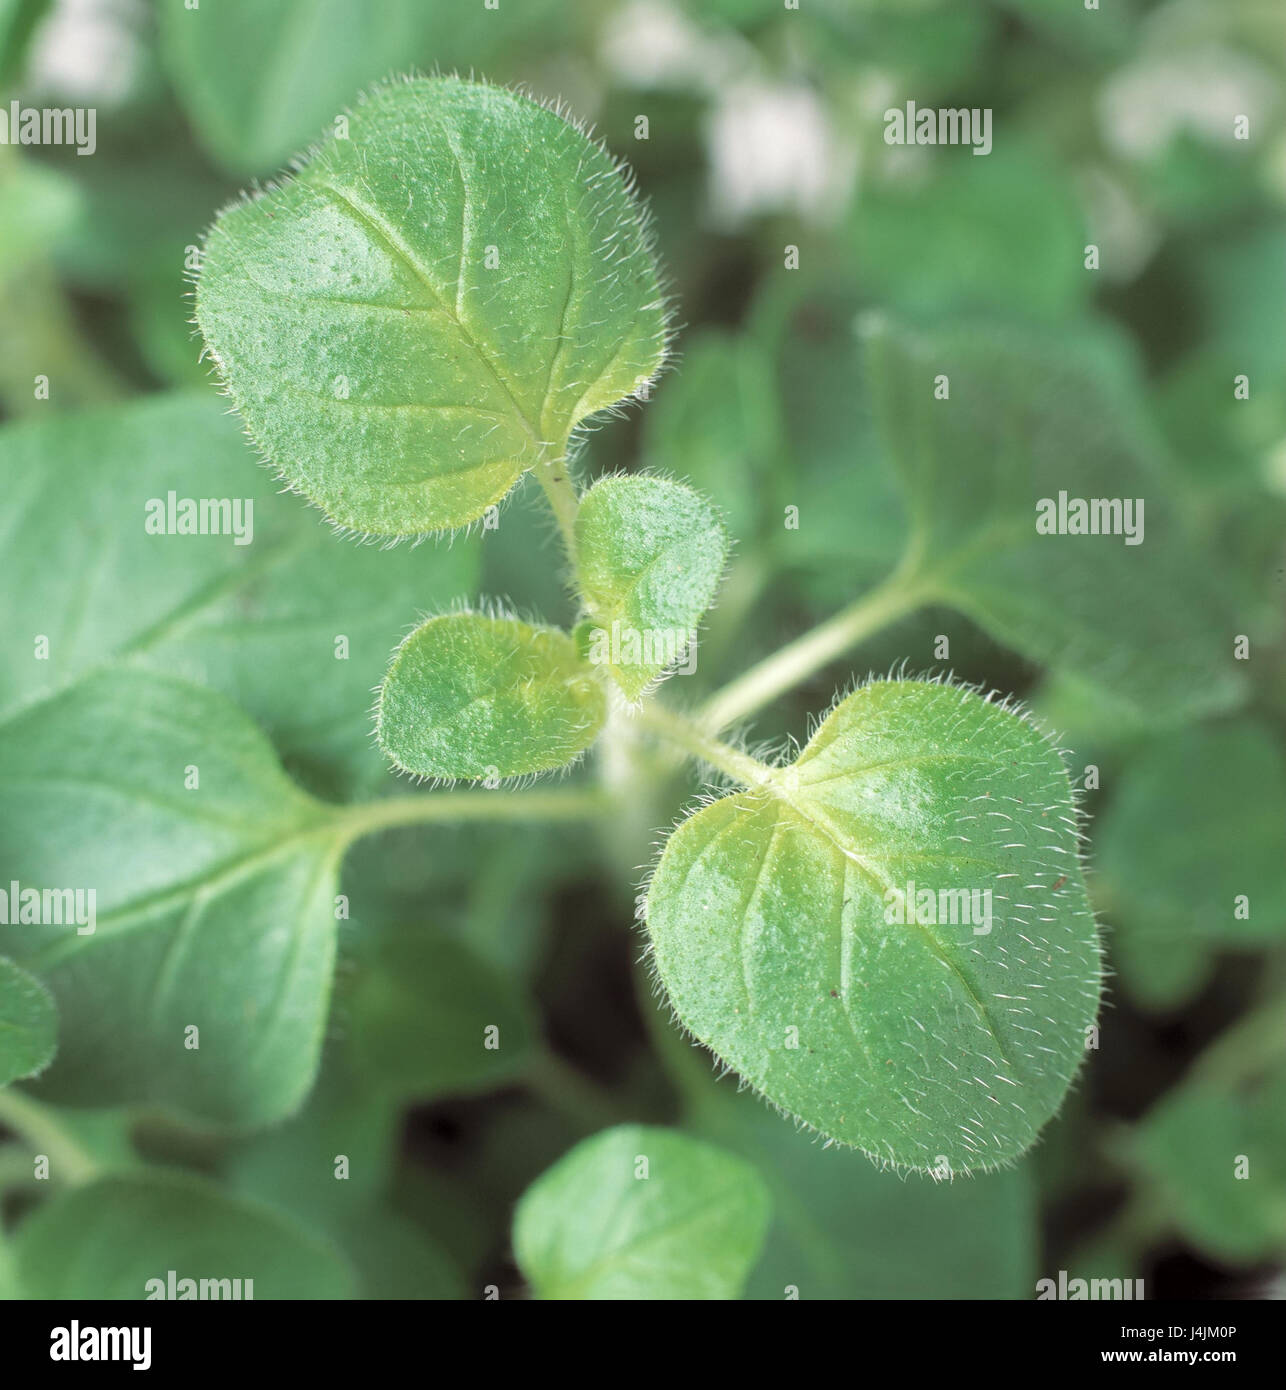 Oregano, Oreganum vulgare, detail, leaves herbs, medicinal plants, spice, culinary spice, plant, herbs, green, object photography Stock Photo